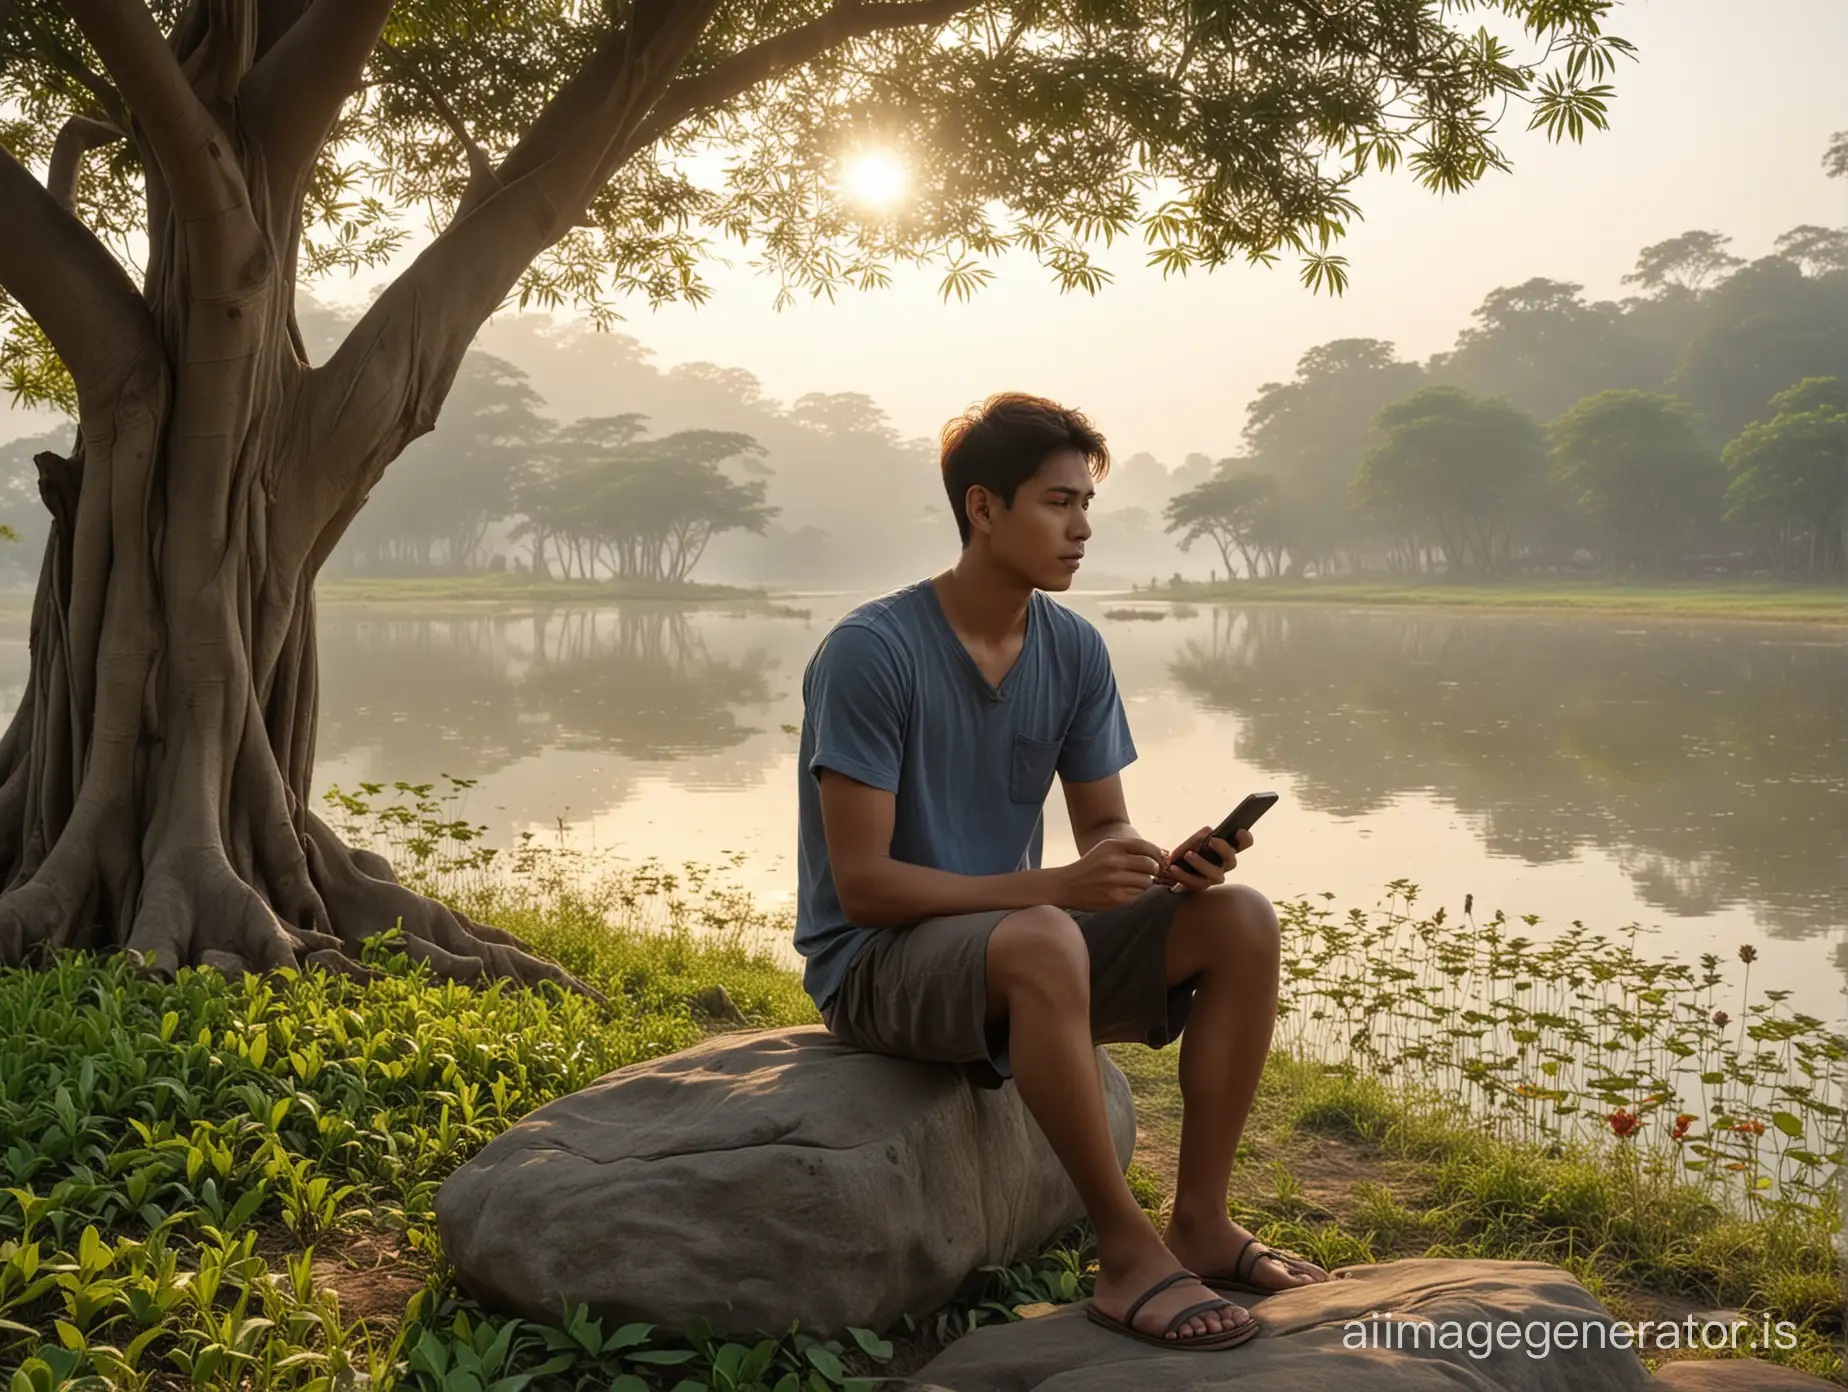 A young man, face and clear skin visible, talking in a smartphone, sitting on a small rock, there should be a single big banyan tree behind, full tree should be visible, dawn, hill, grass, pond, Lilly's, birds, Natural and Realistic HD image.